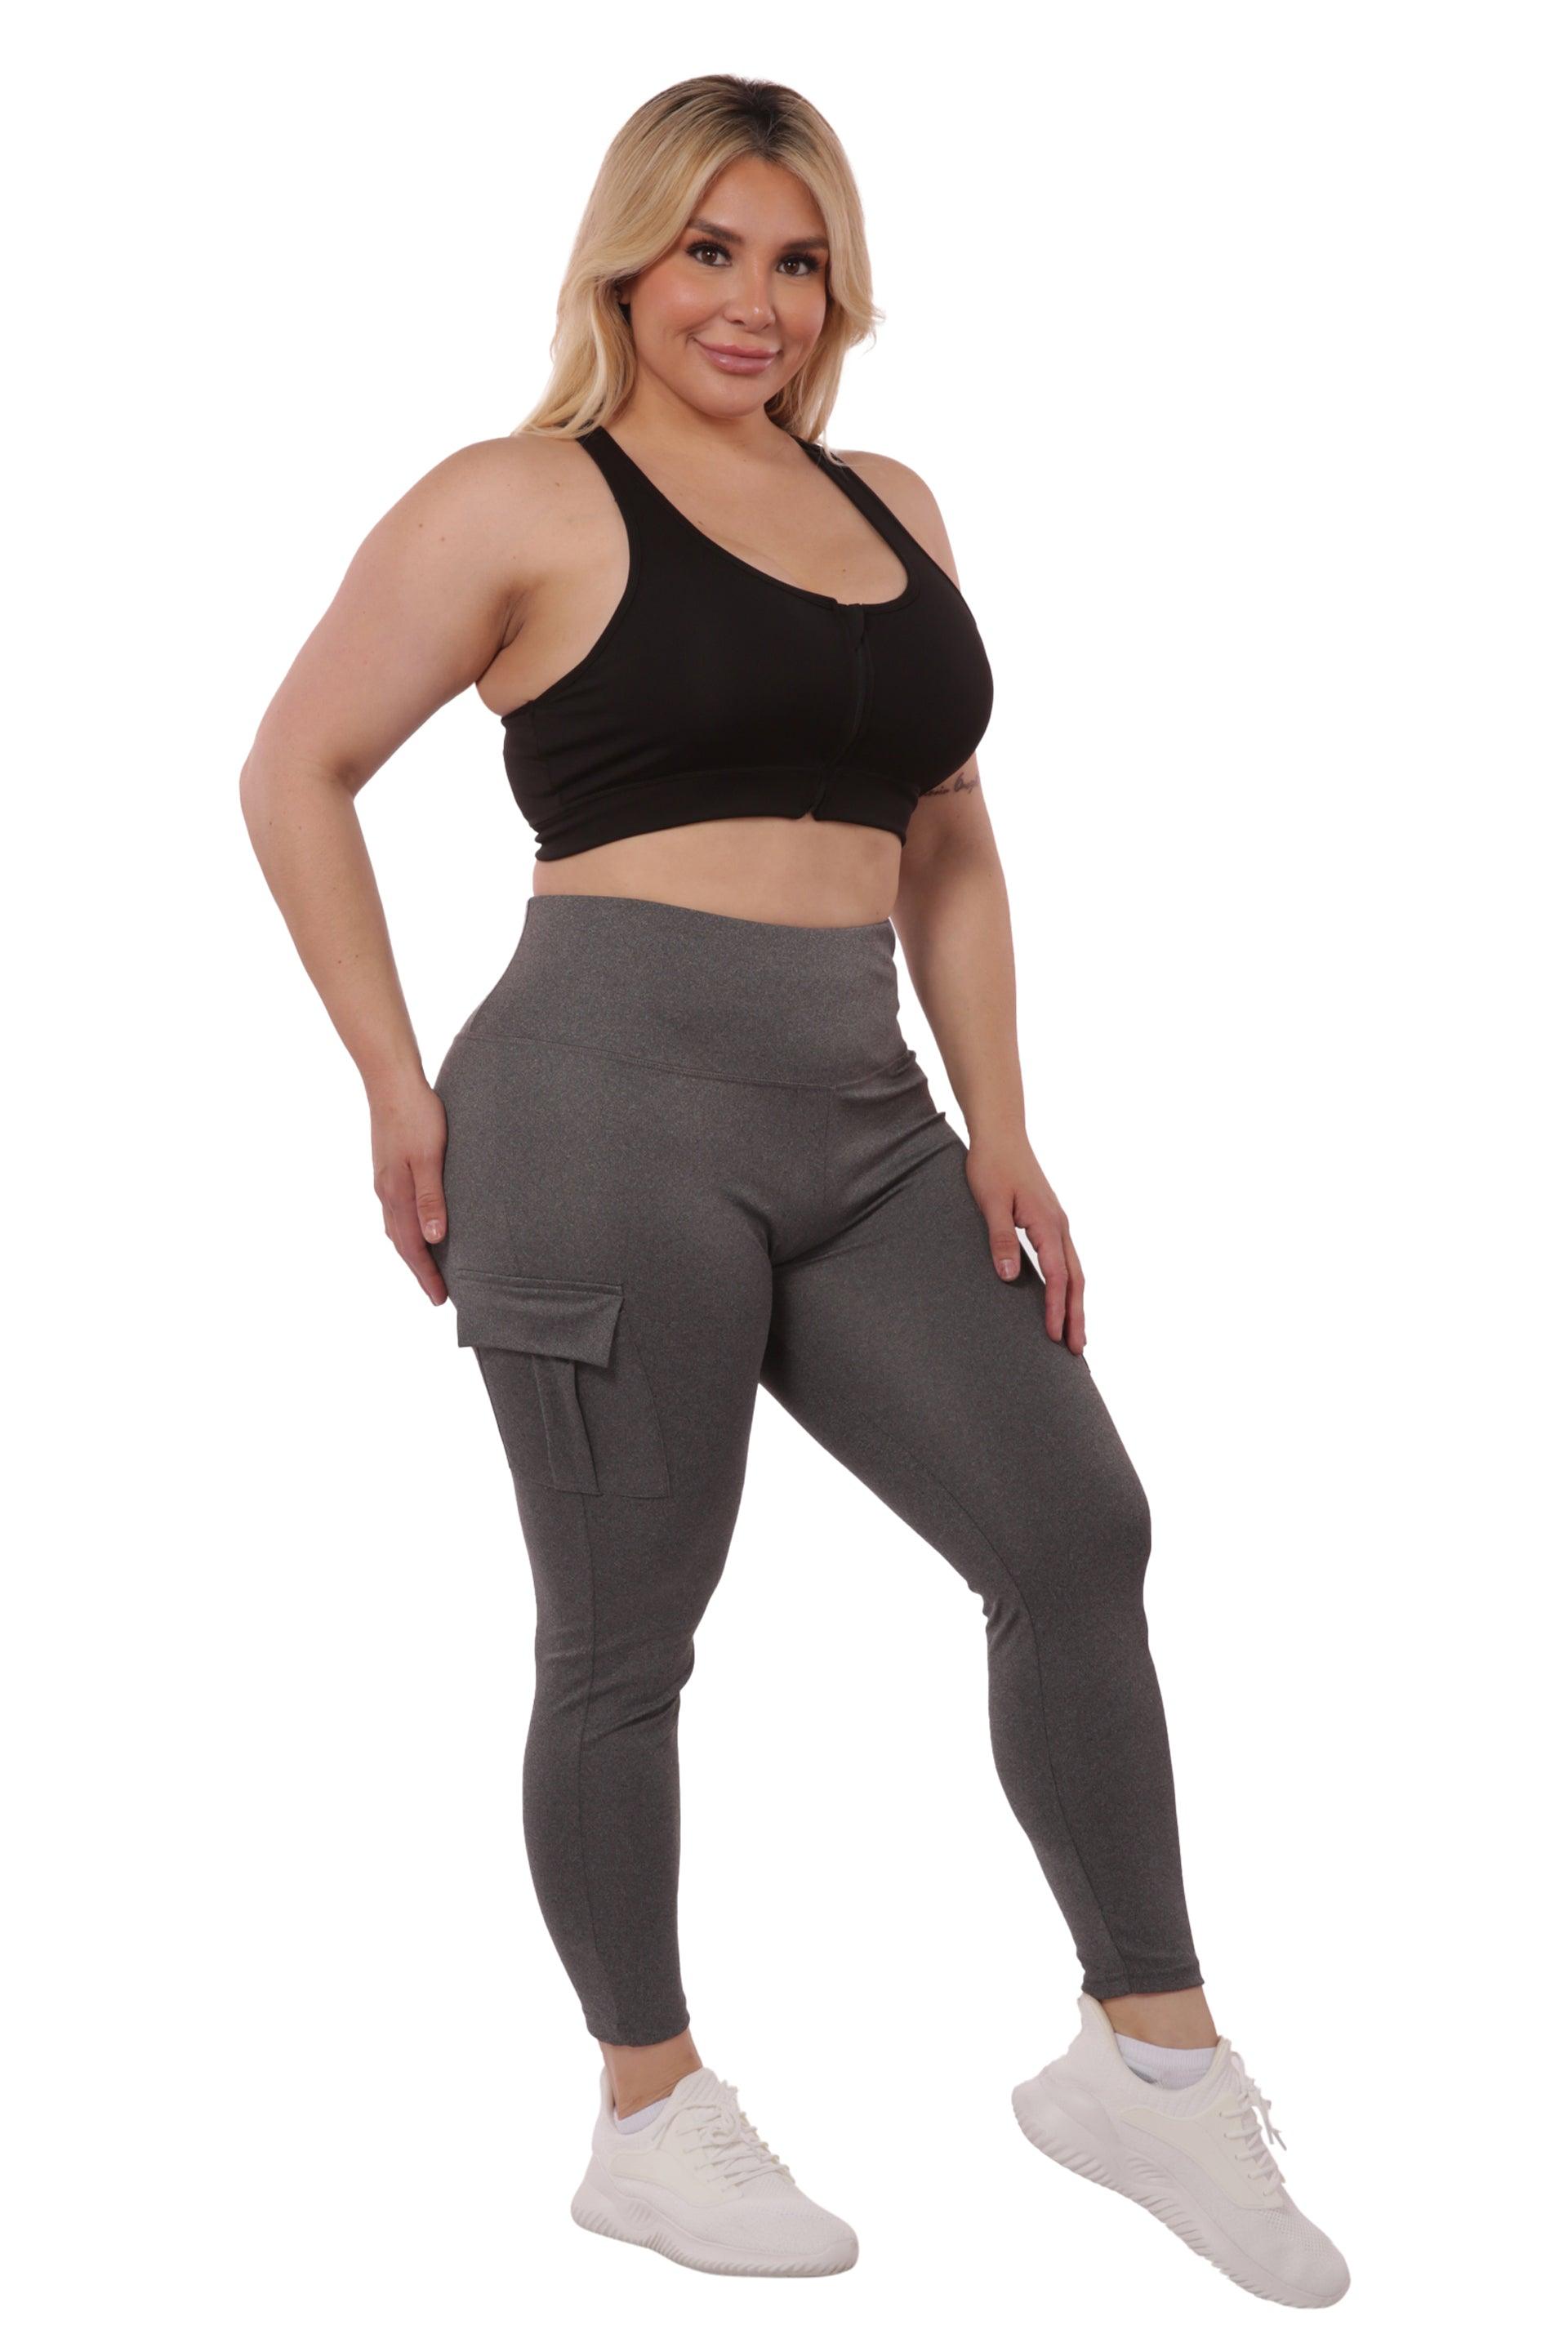 Plus Size High Waist Tummy Control Sports Leggings With Side Pockets & Mesh  Panels - Magenta